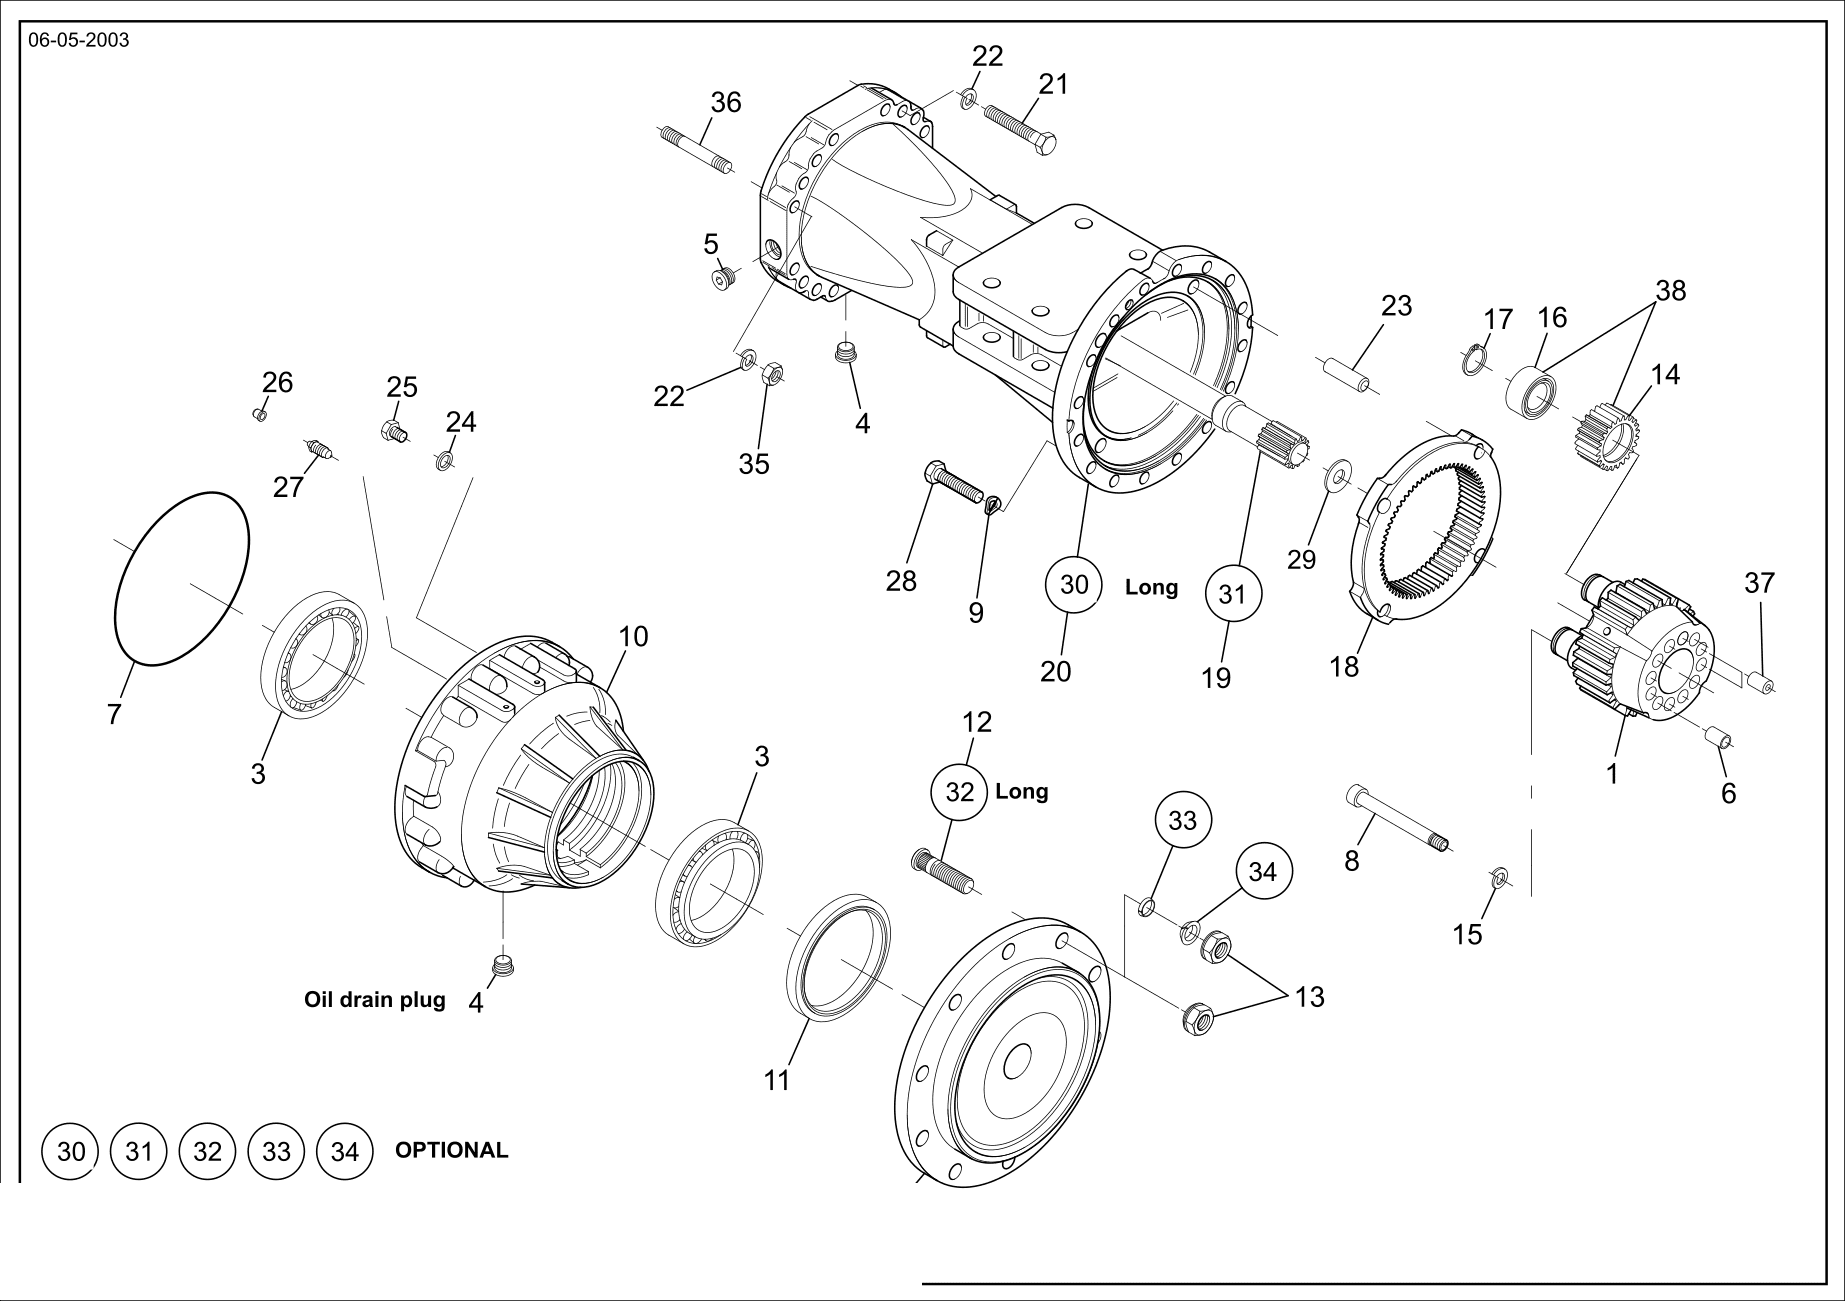 drawing for CNH NEW HOLLAND 71477144 - HALF SHAFT (figure 1)